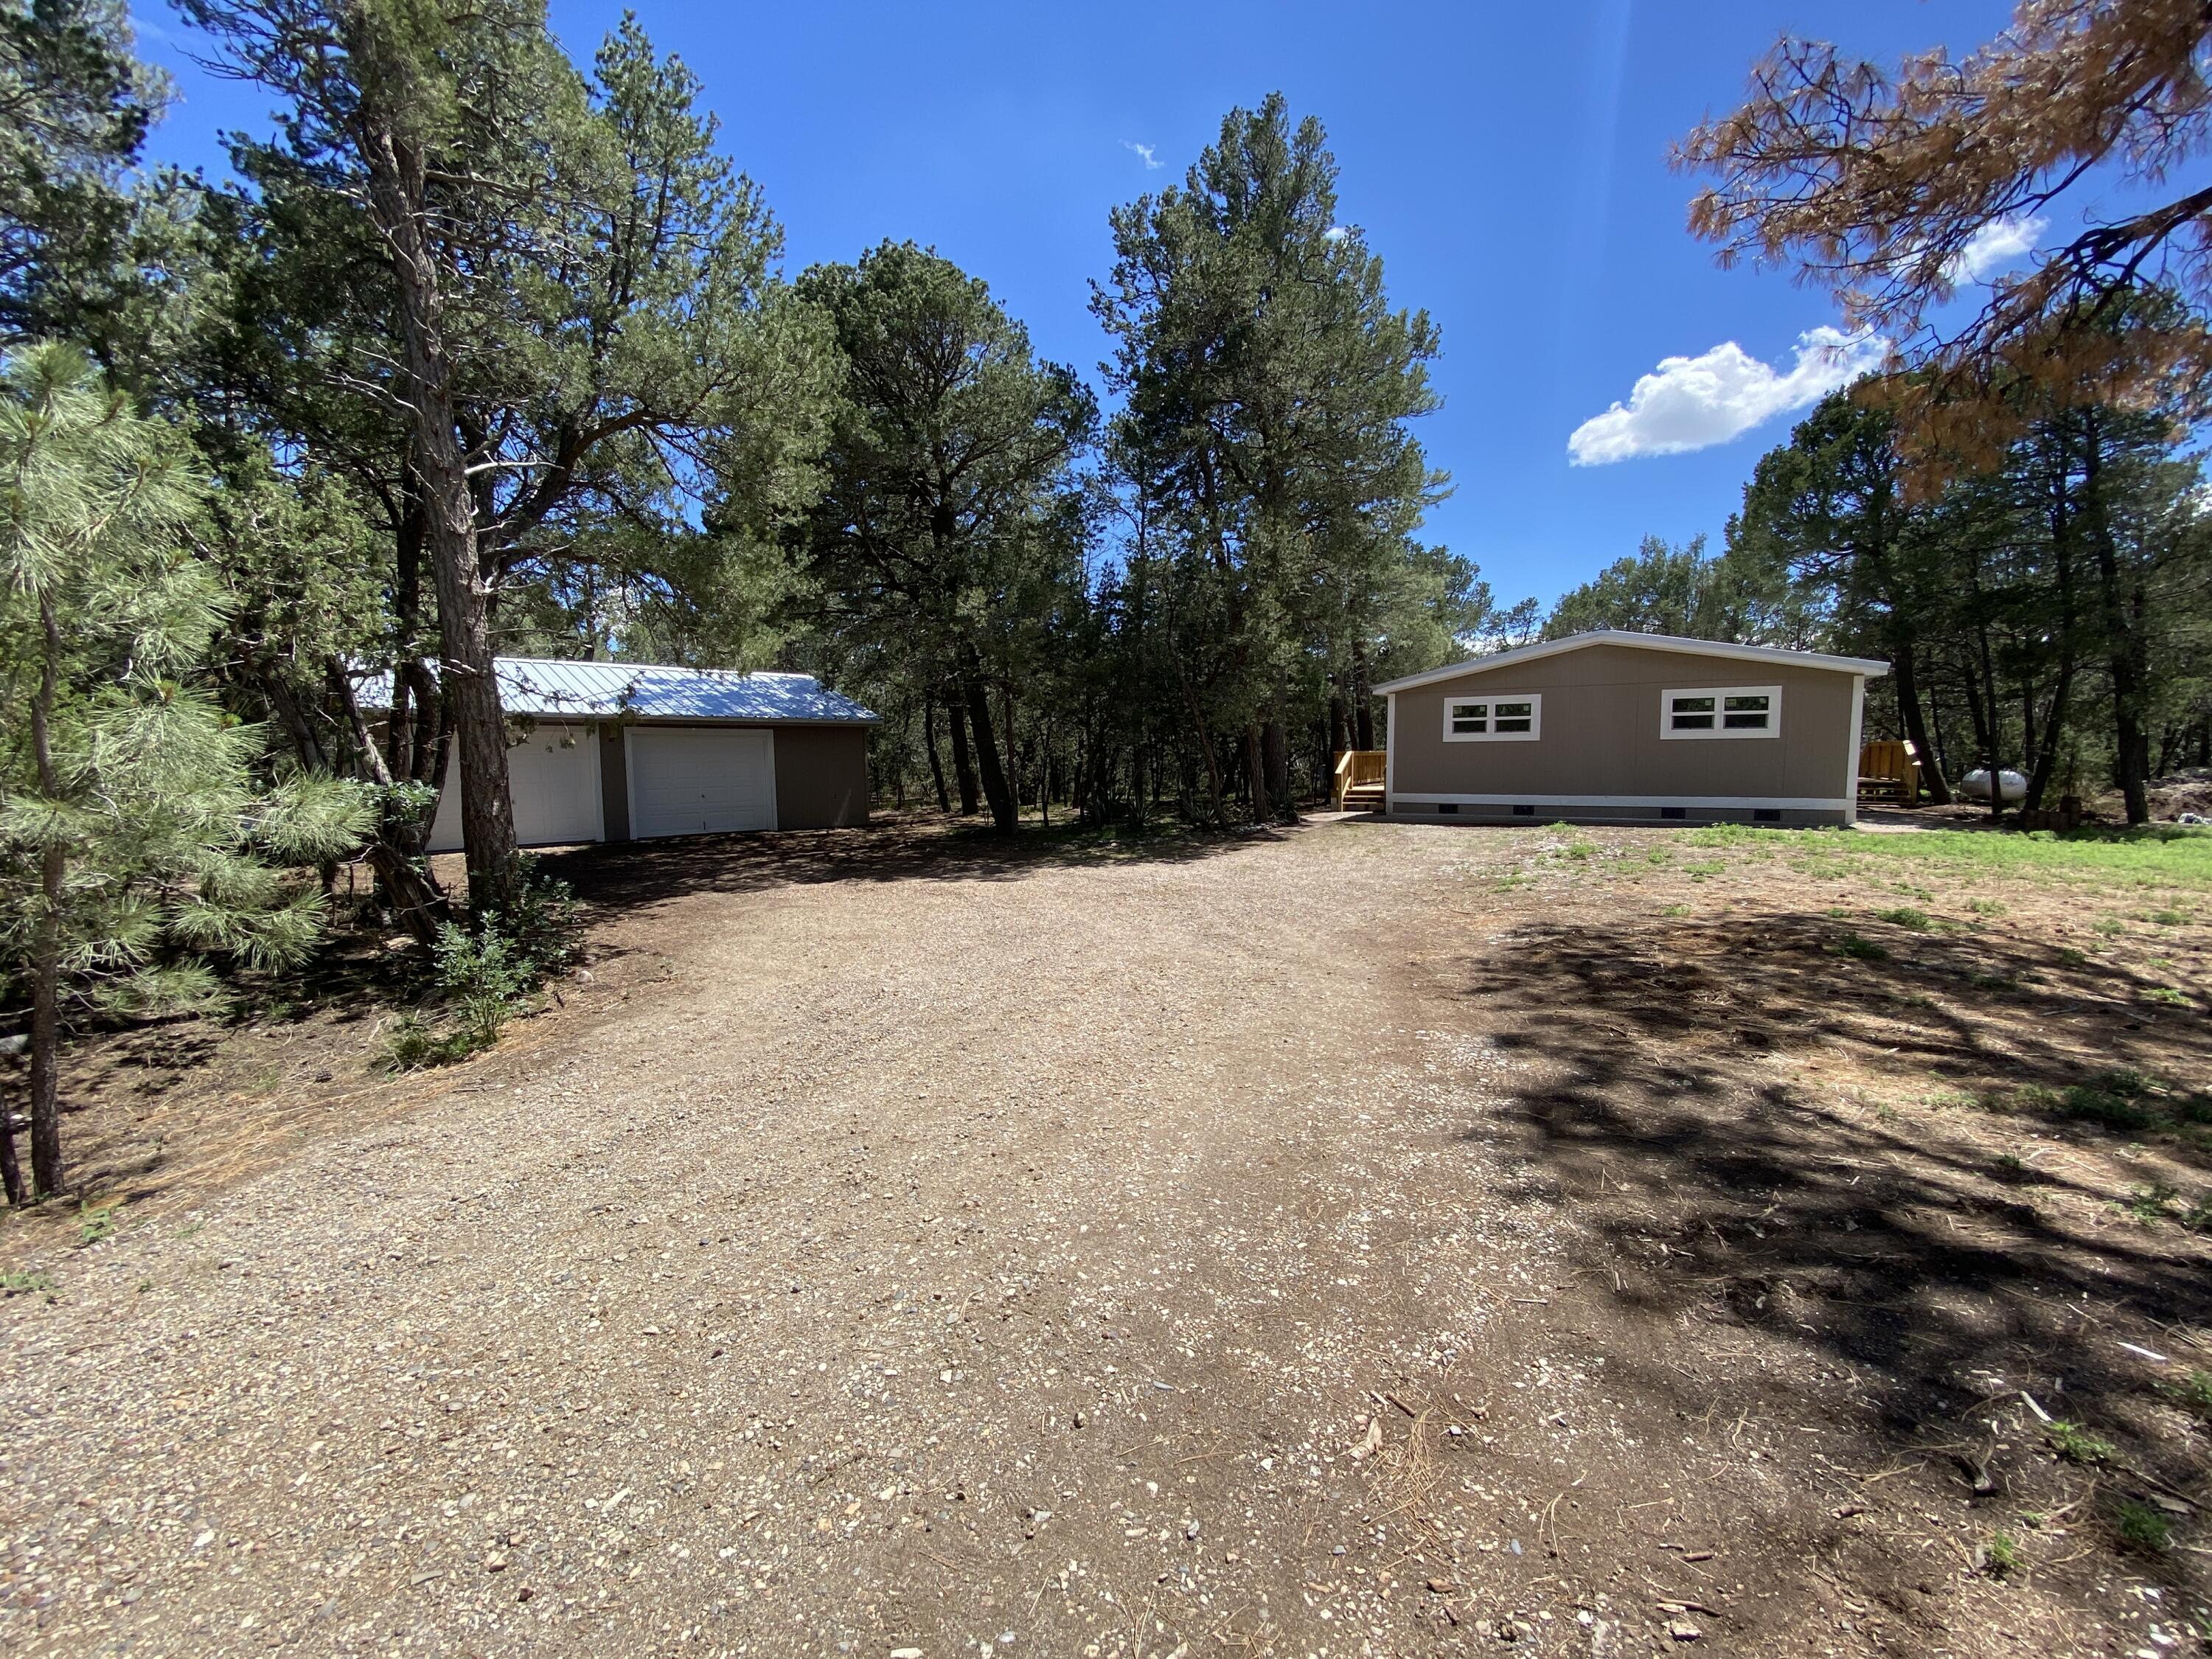 Private, beautiful 2acre lot with tall Ponderosa Pines. Totally remodeled manufactured home, 2 car detached garage, front and back decks.  Too many upgrades to list, must see.